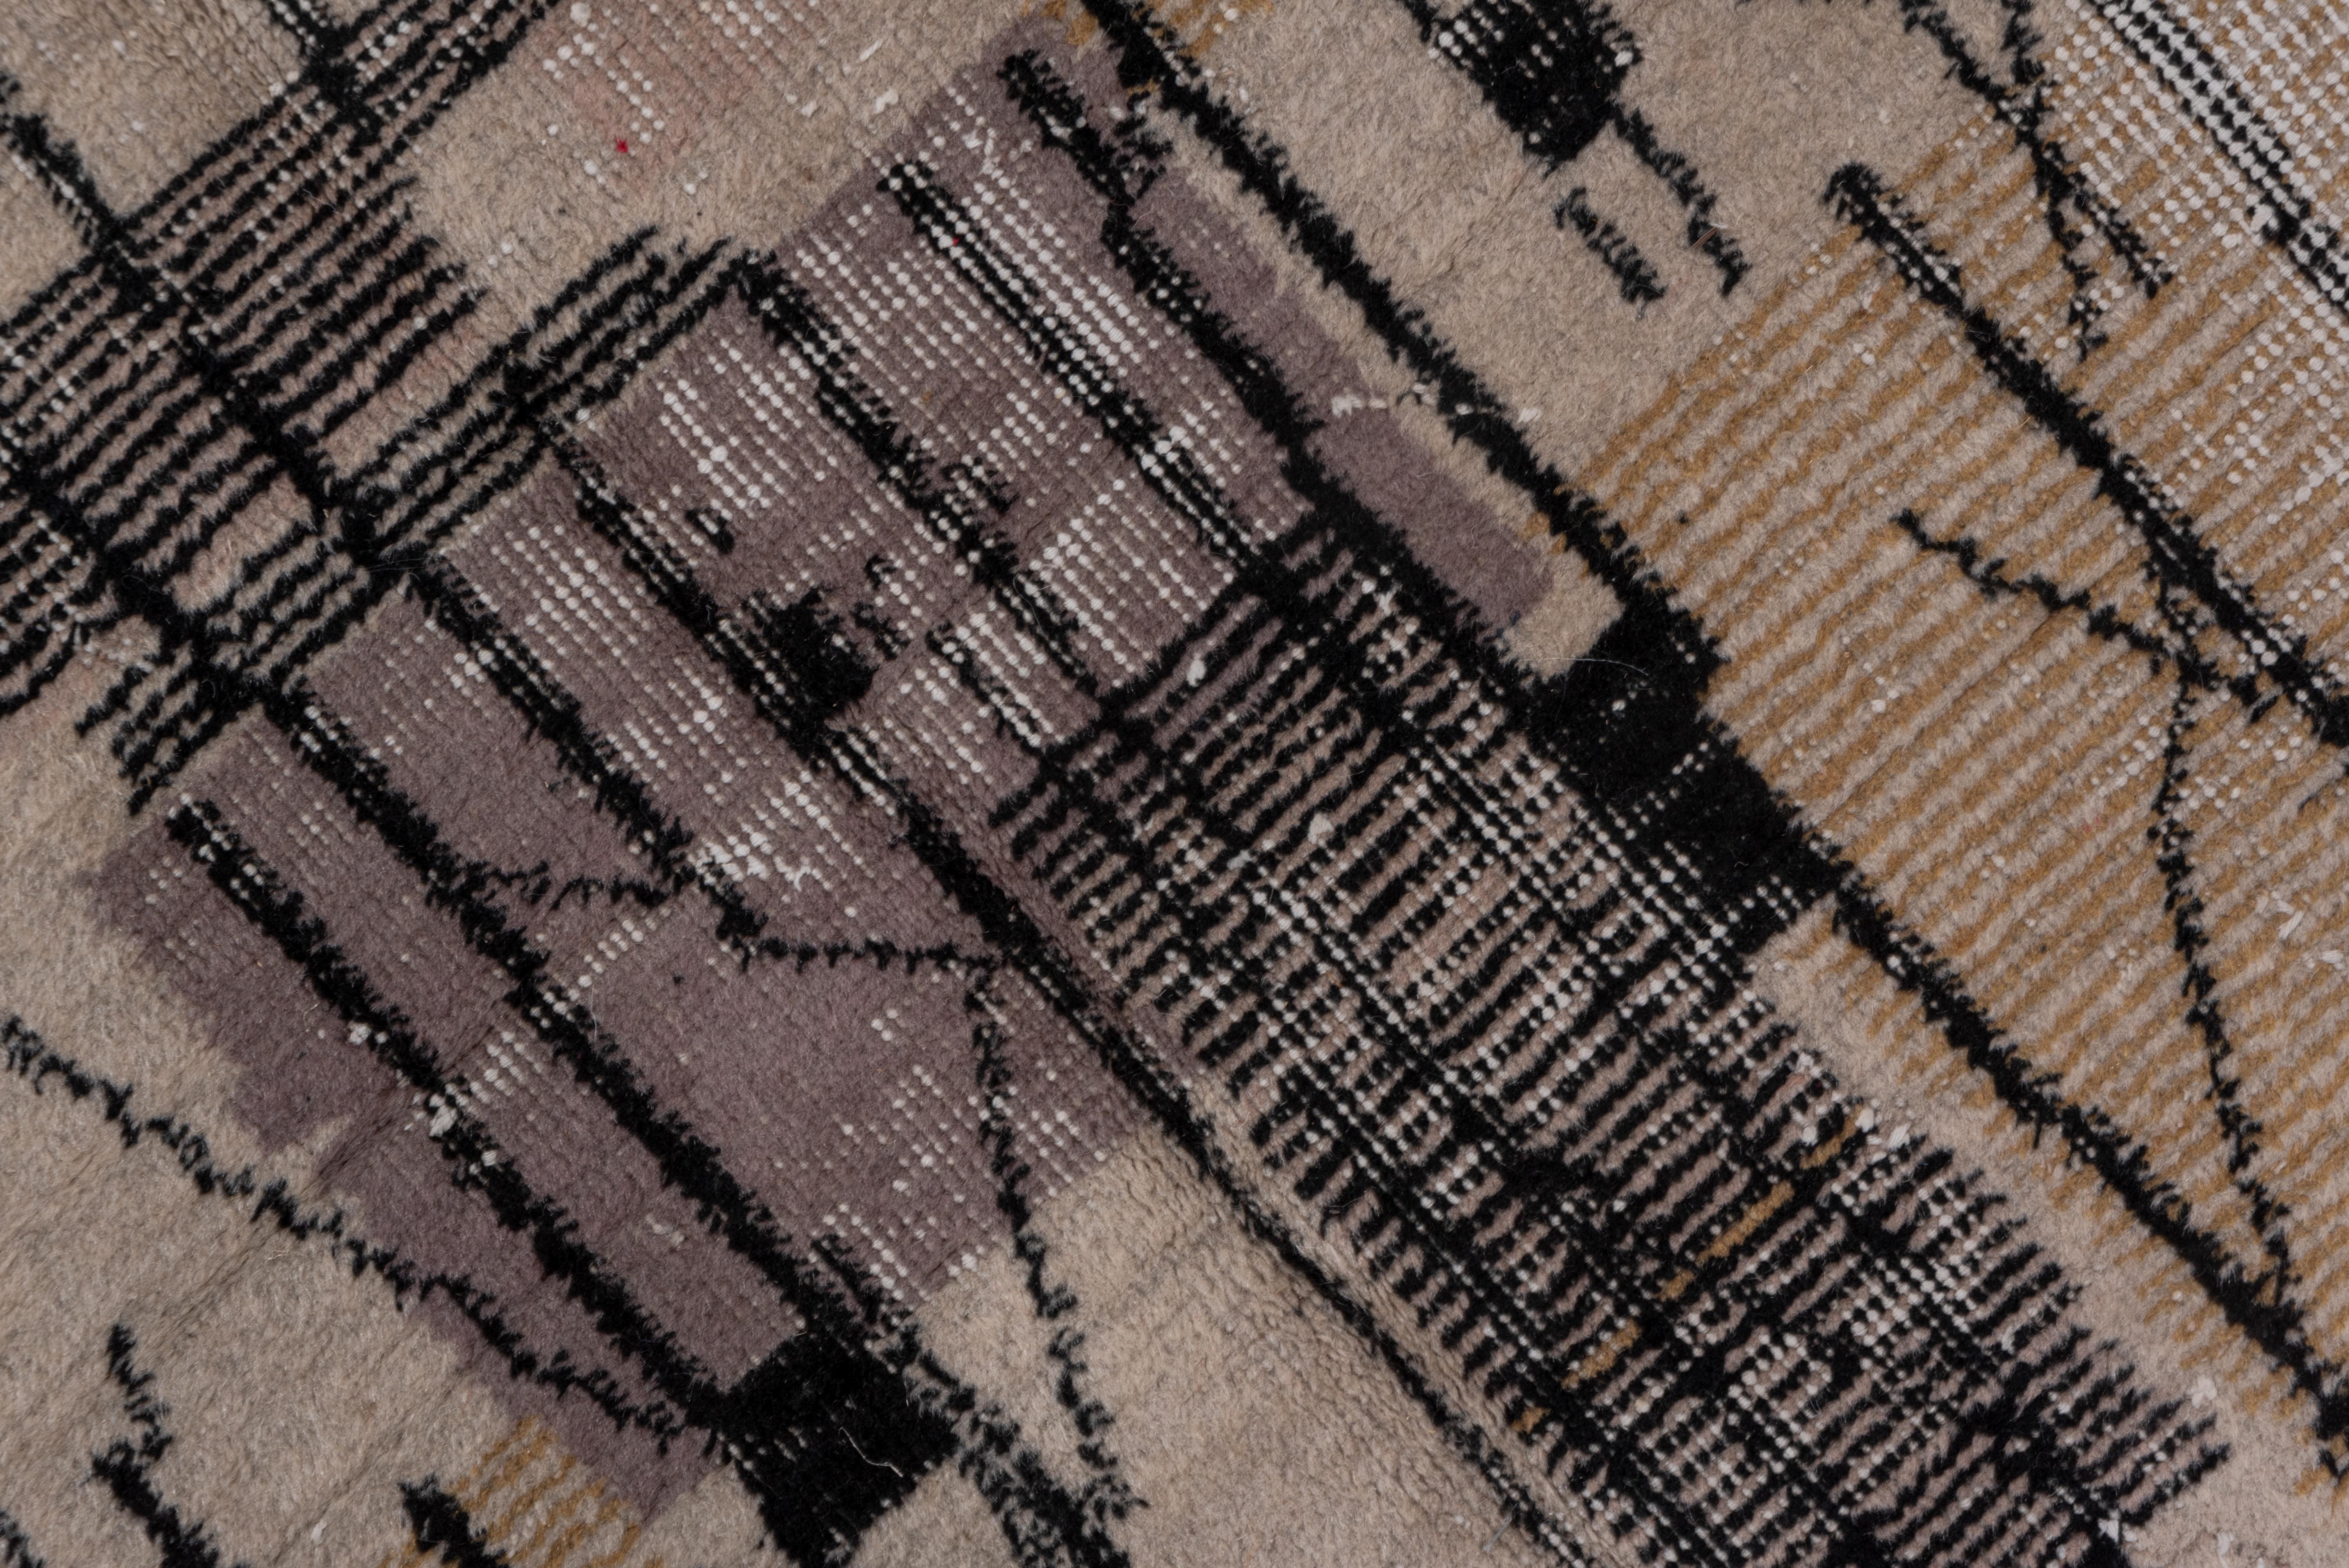 This irregularly good pile to distressed borderless carpet was woven with a repeating, abstract pattern of rectangles, close parallel lines, and longer, freely floating verticals in shades of grey flannel, black, and cream. The pattern relates to